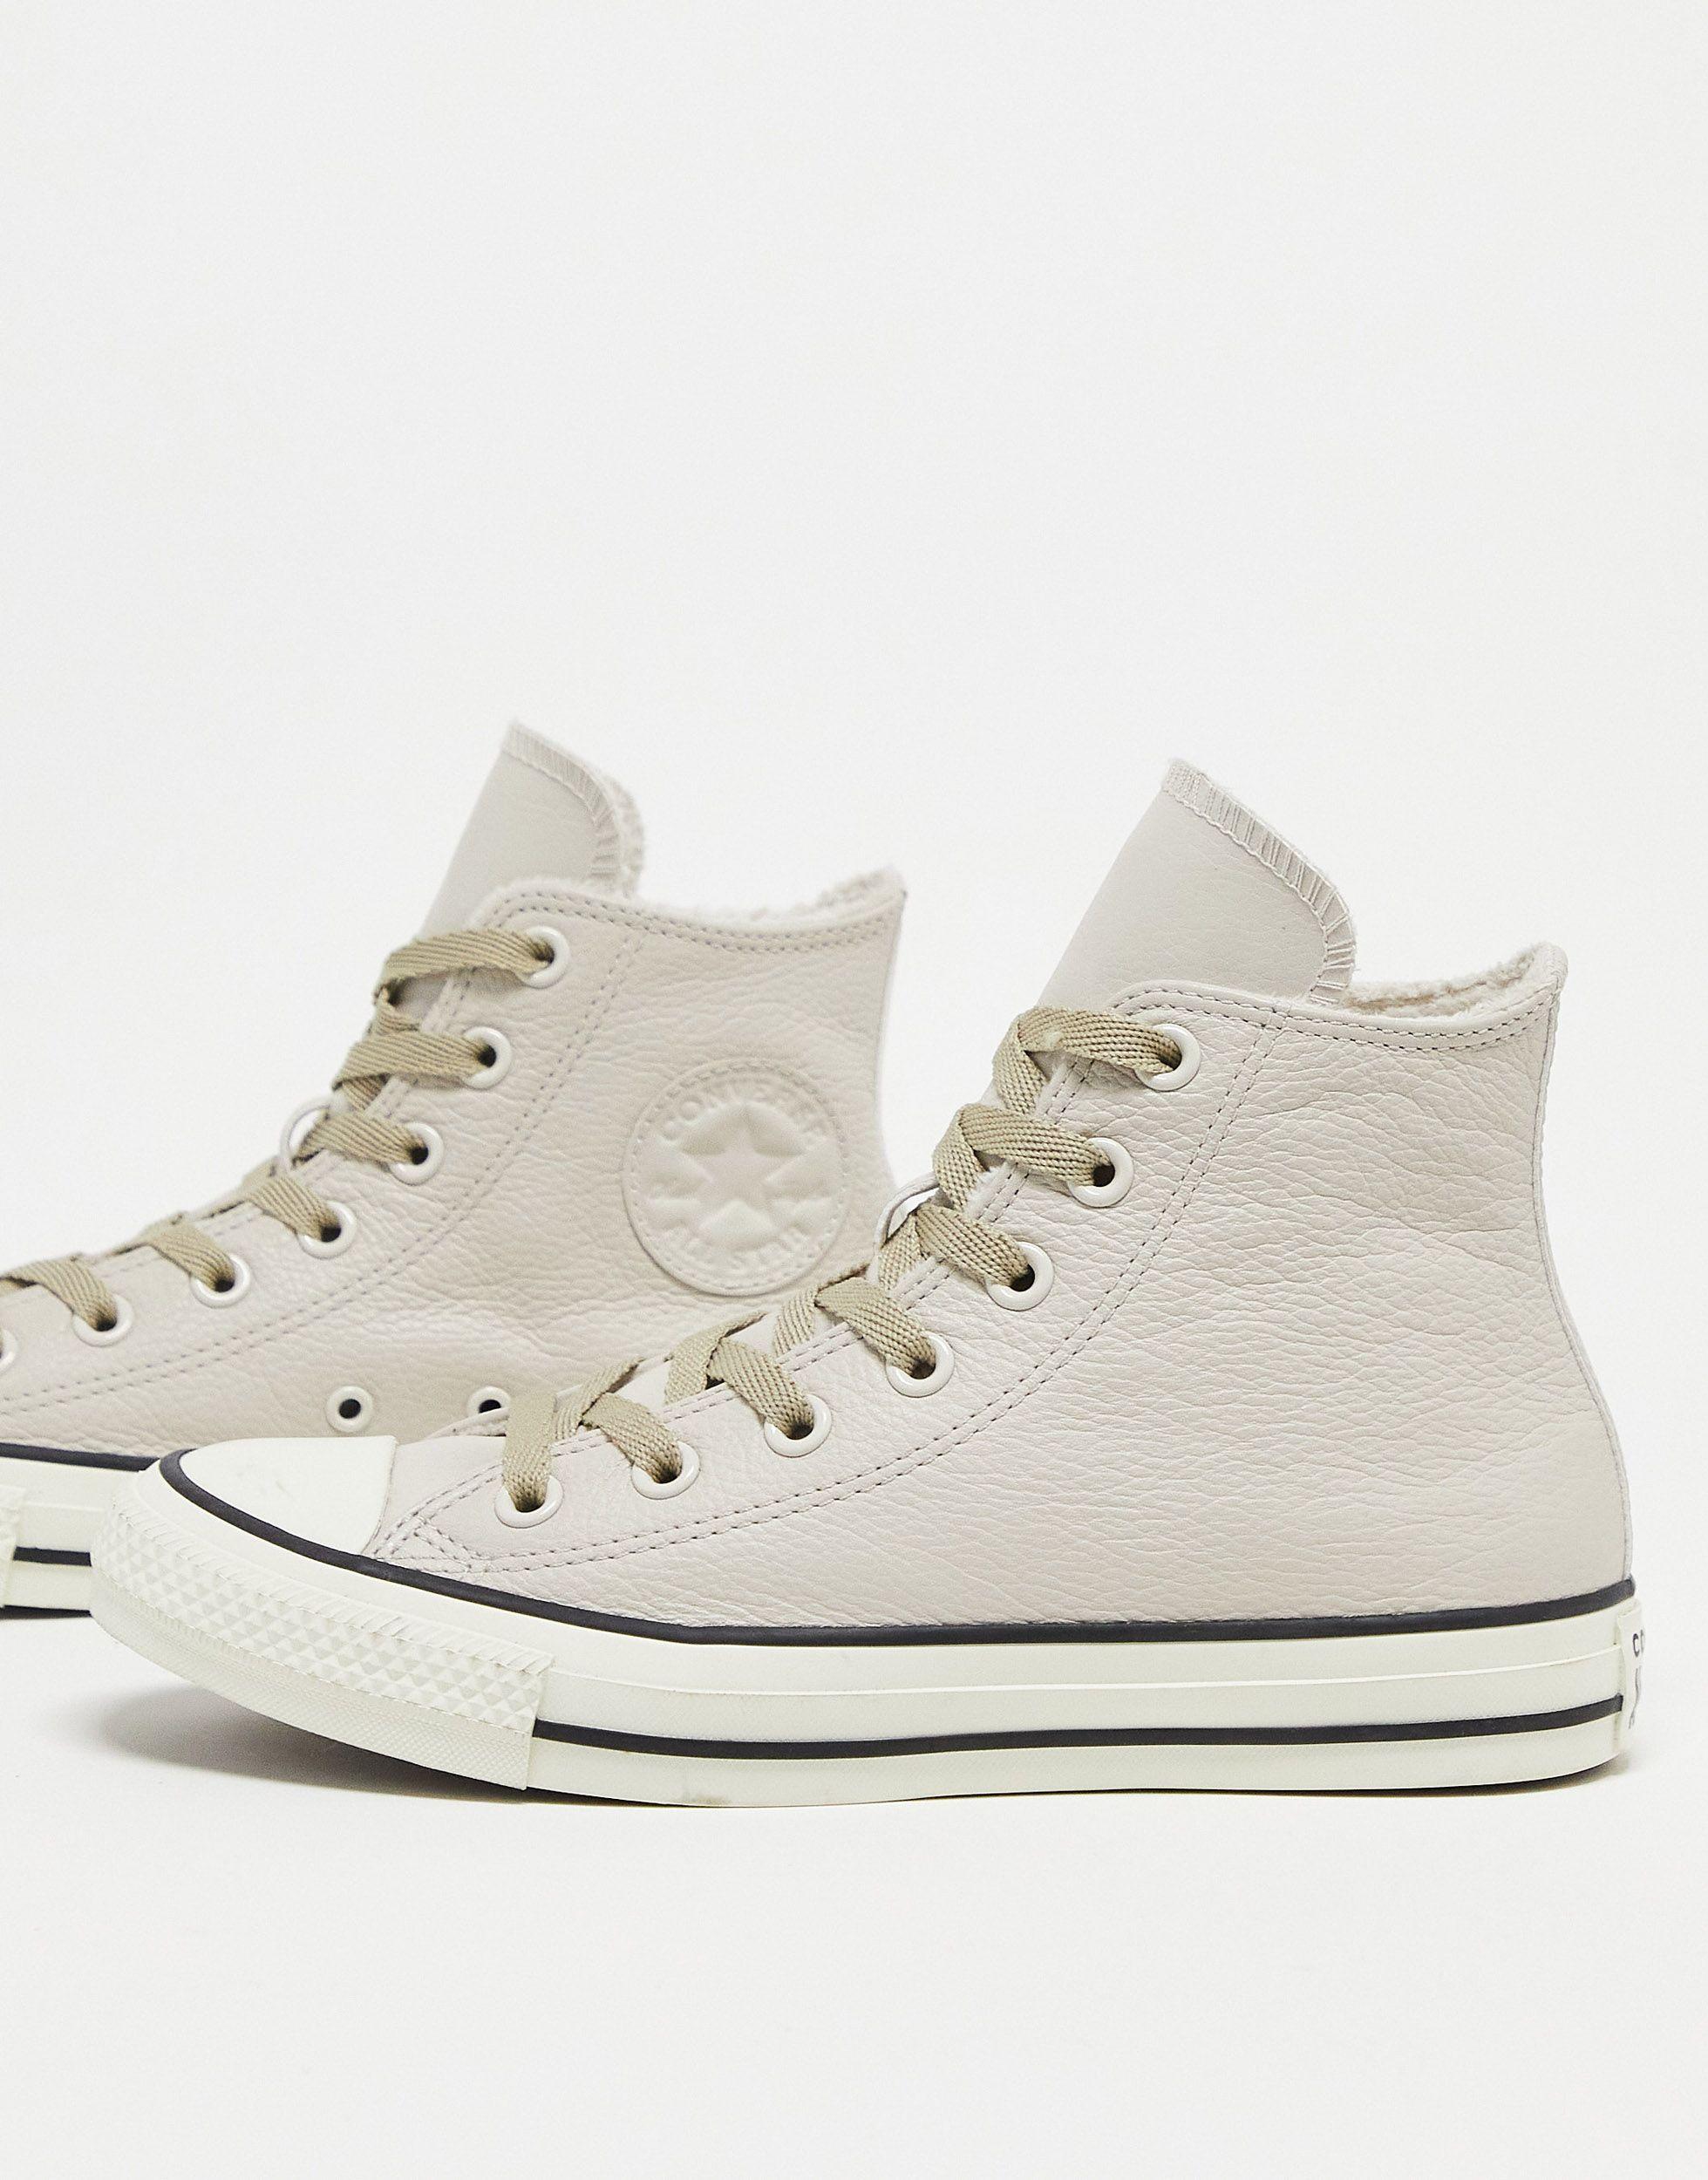 Converse Chuck Taylor All Star Leather Hi Trainers With Faux Fur Lining in  Natural | Lyst Australia